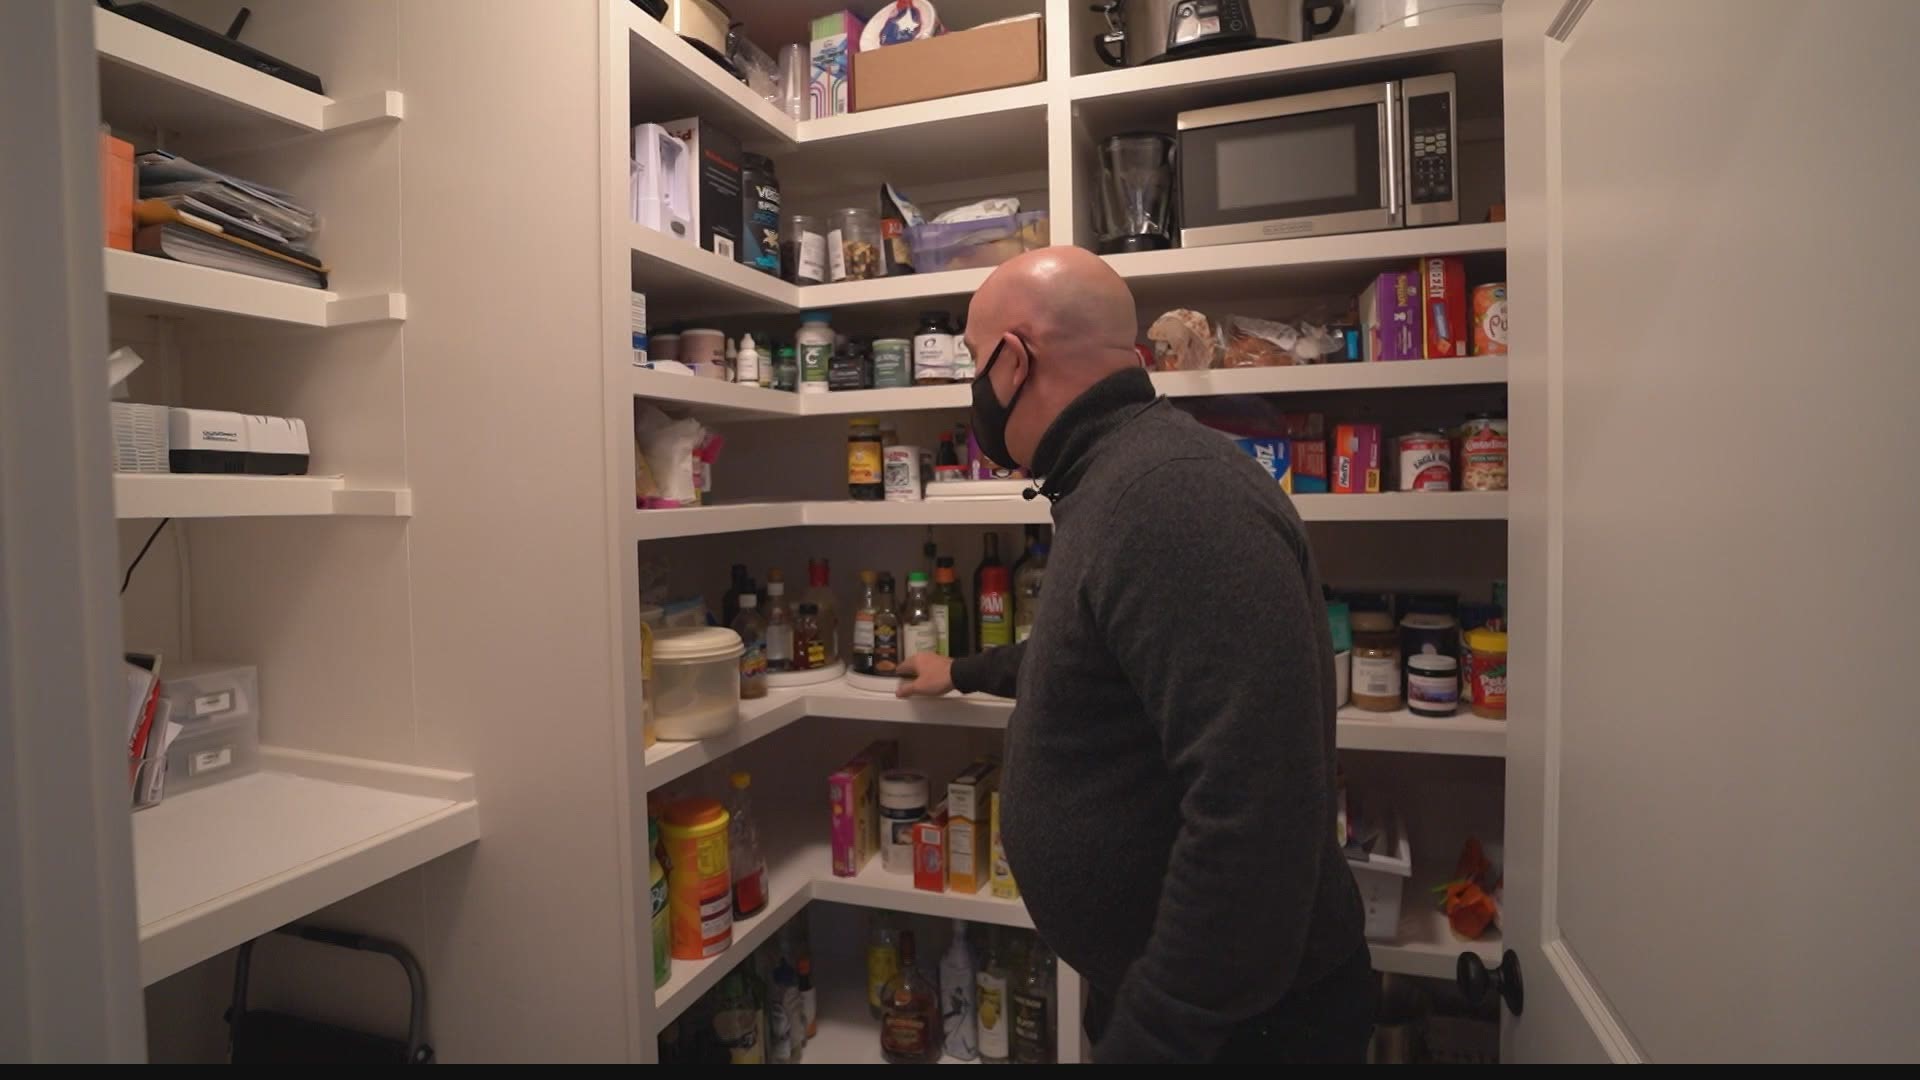 A local musician is reinventing himself with a new career as a home organizer.